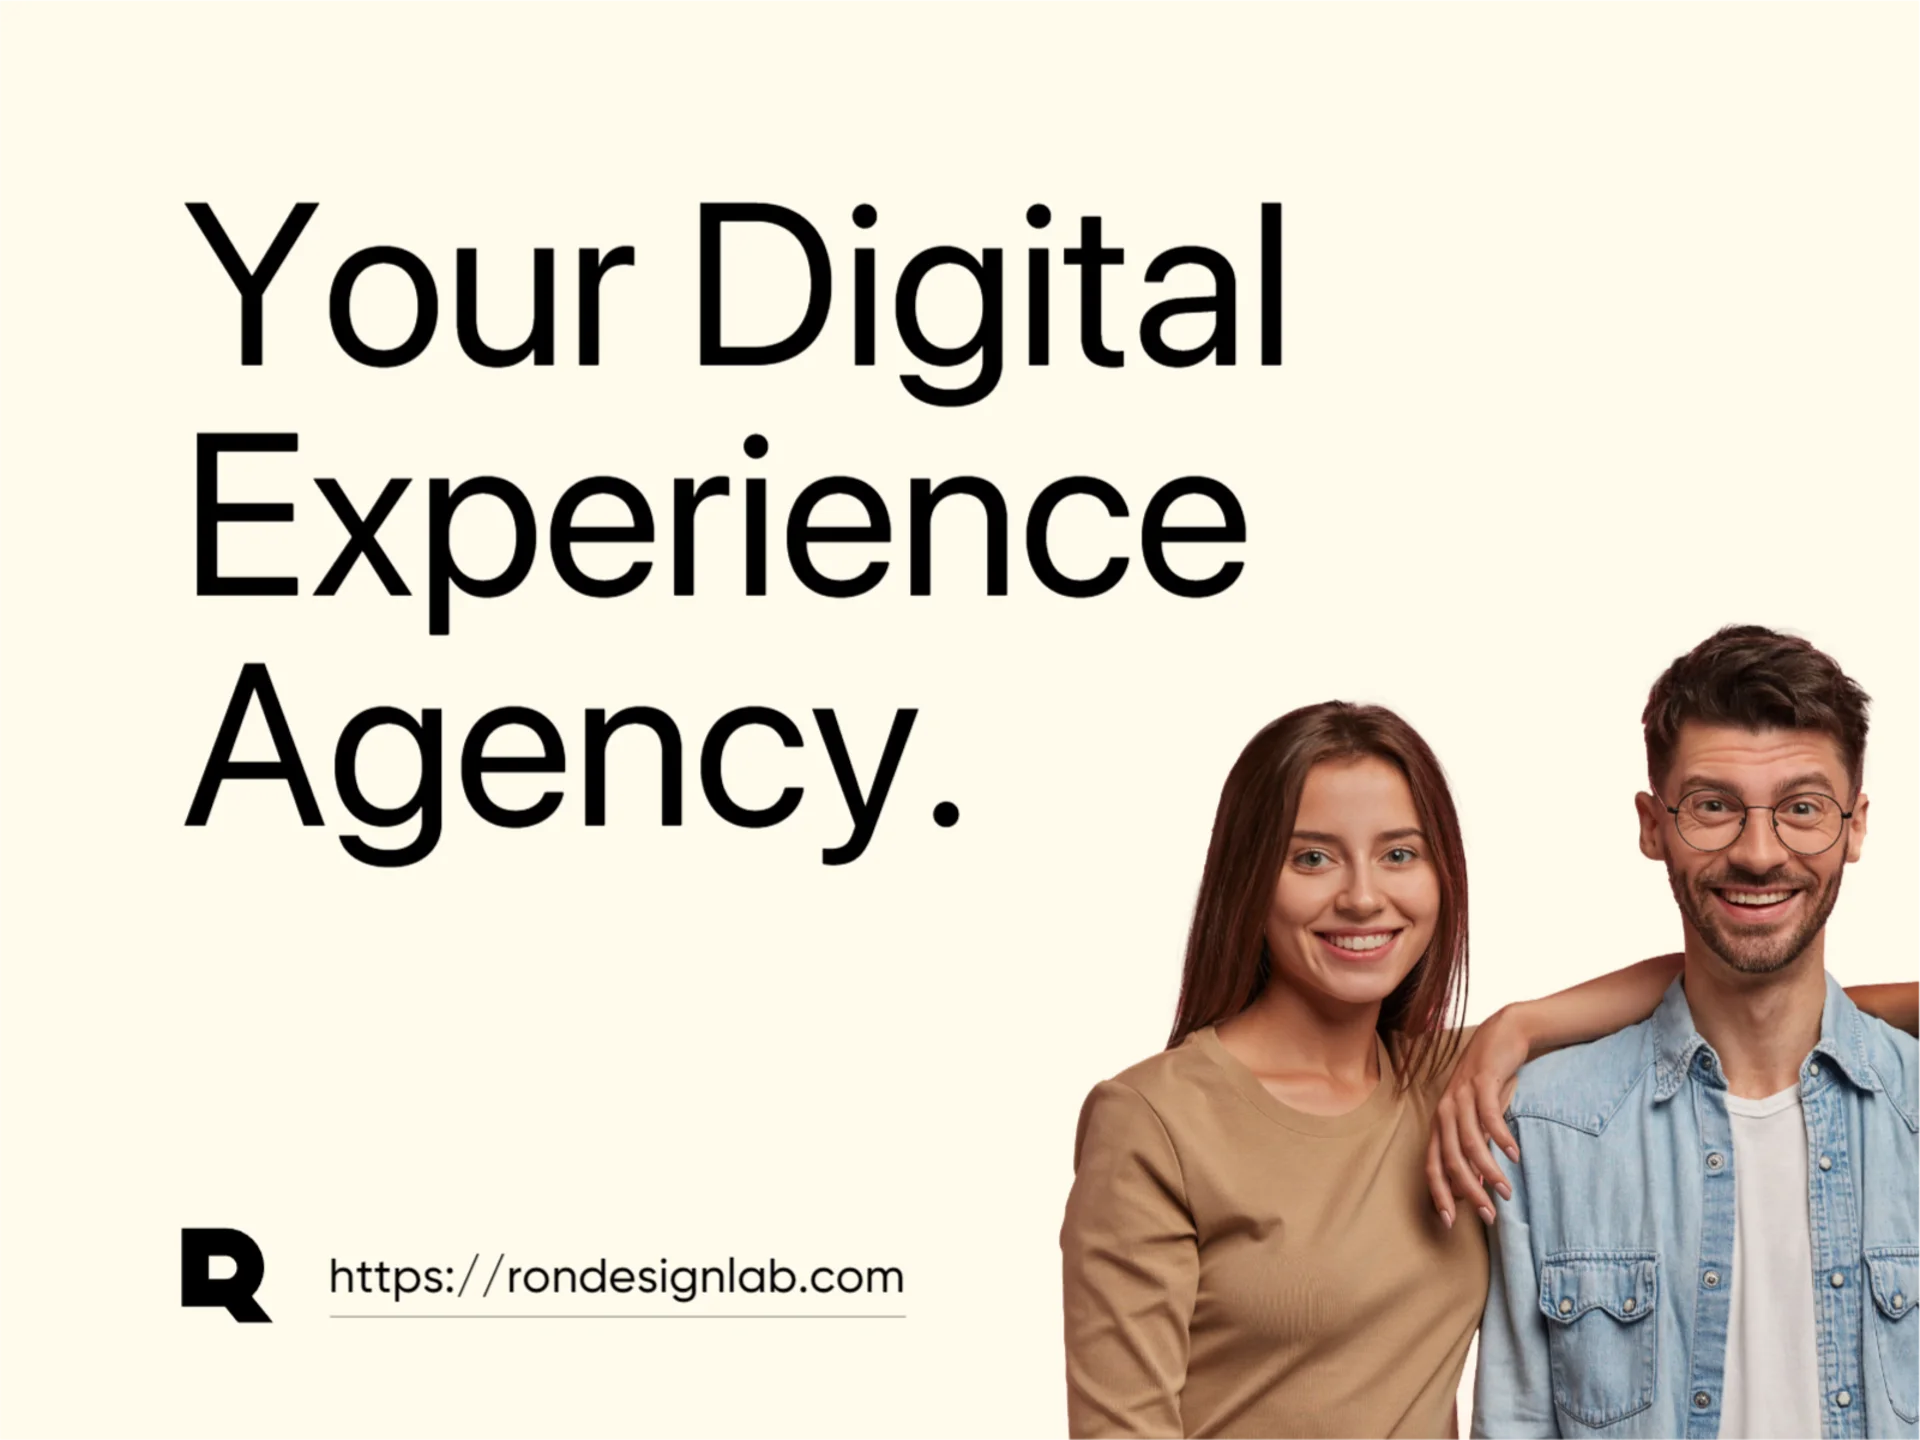 Your digital experience agency